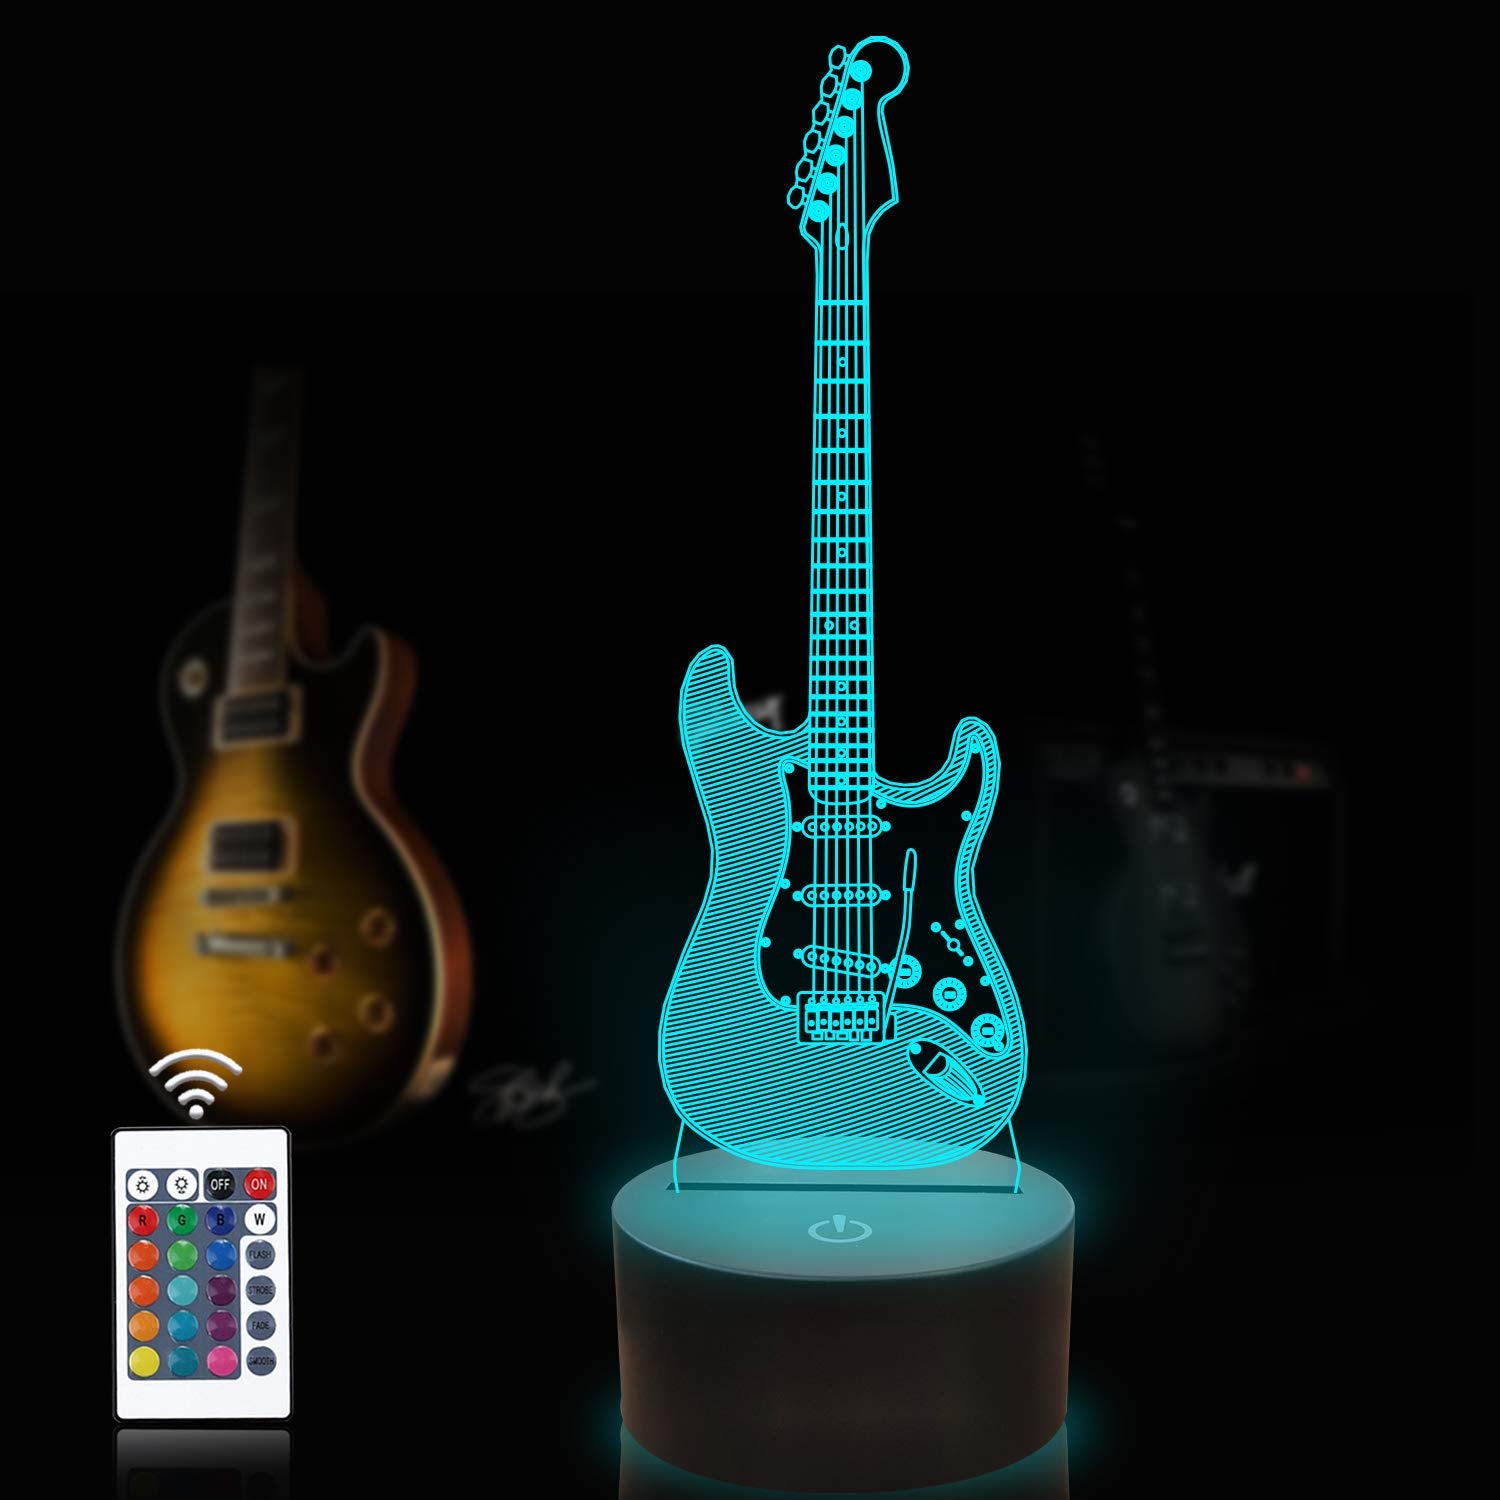 Coopark Guitar 3D Night Light, Optical Illusion LED Bedside Lamp with Remote Control 16 Colors Changing, Home Party Decor Creative Birthday Gift for Friend Music Lover